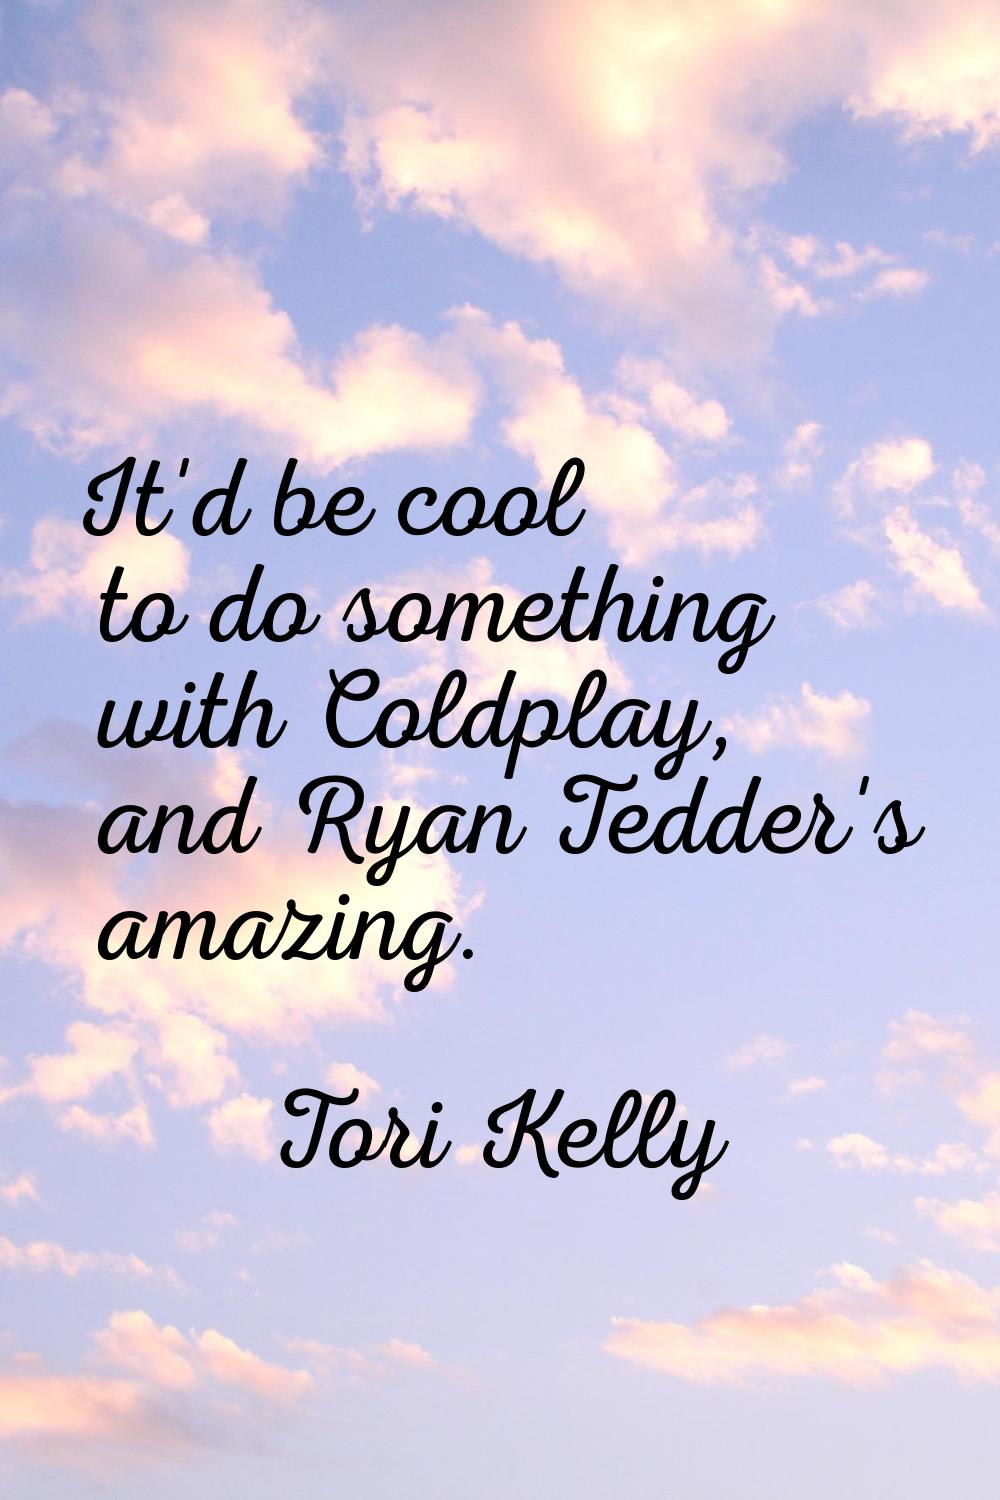 It'd be cool to do something with Coldplay, and Ryan Tedder's amazing.